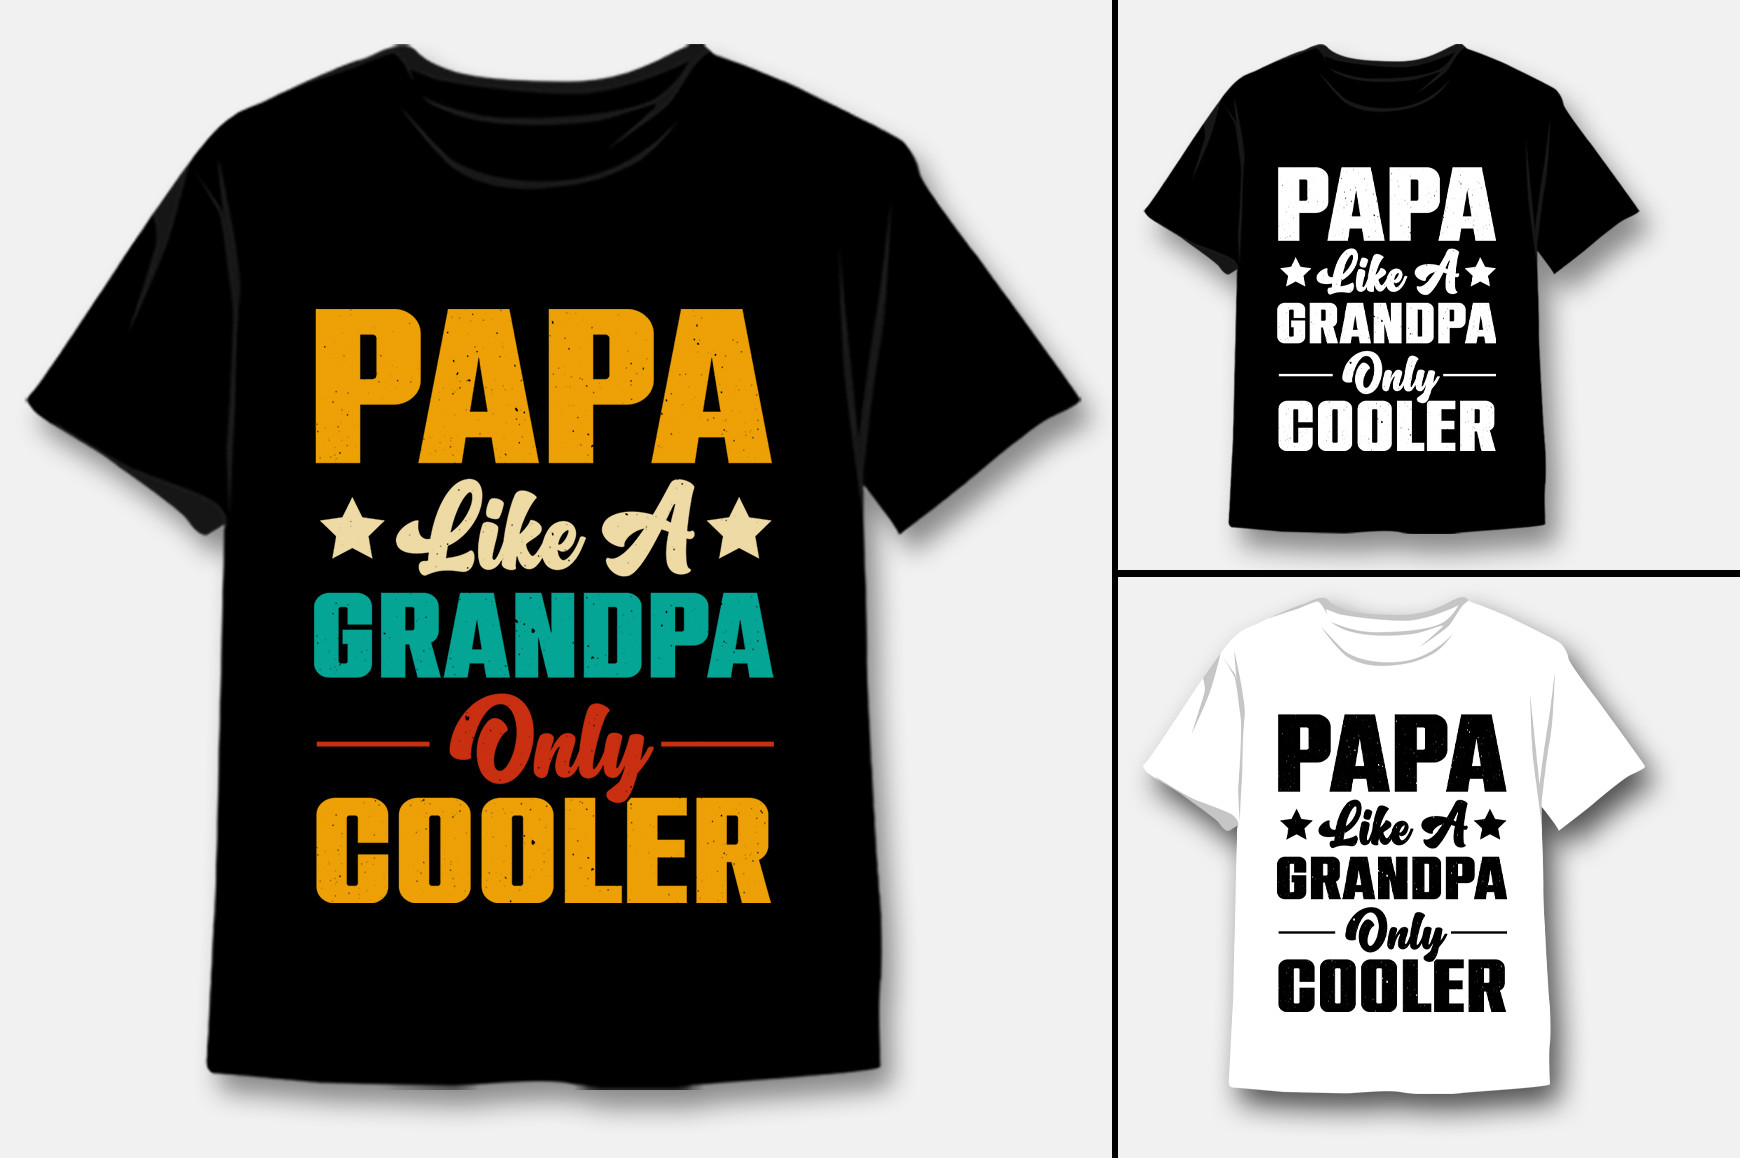 Papa Like a Grandpa Only Cooler T-Shirt Graphic by T-Shirt Design ...